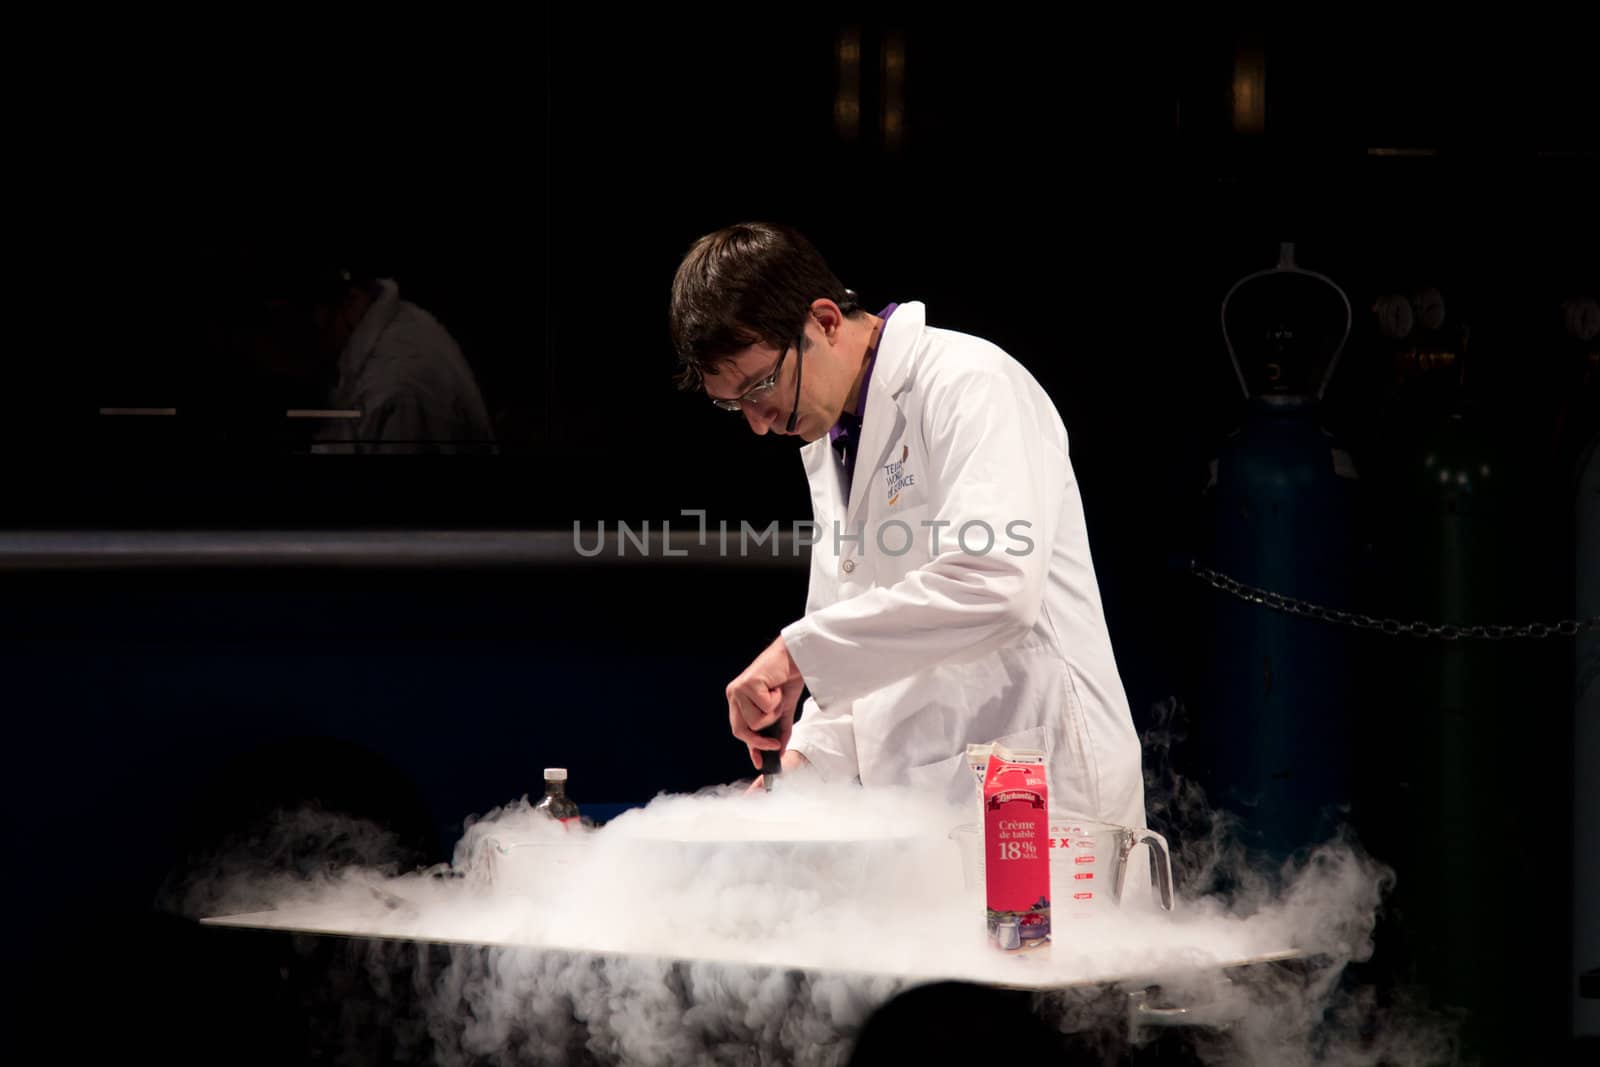 A scientist conducting an experiment to make ice cream out of cream using liquid nitrogen which is forming a white smoke of cold gas as it vaporizes.